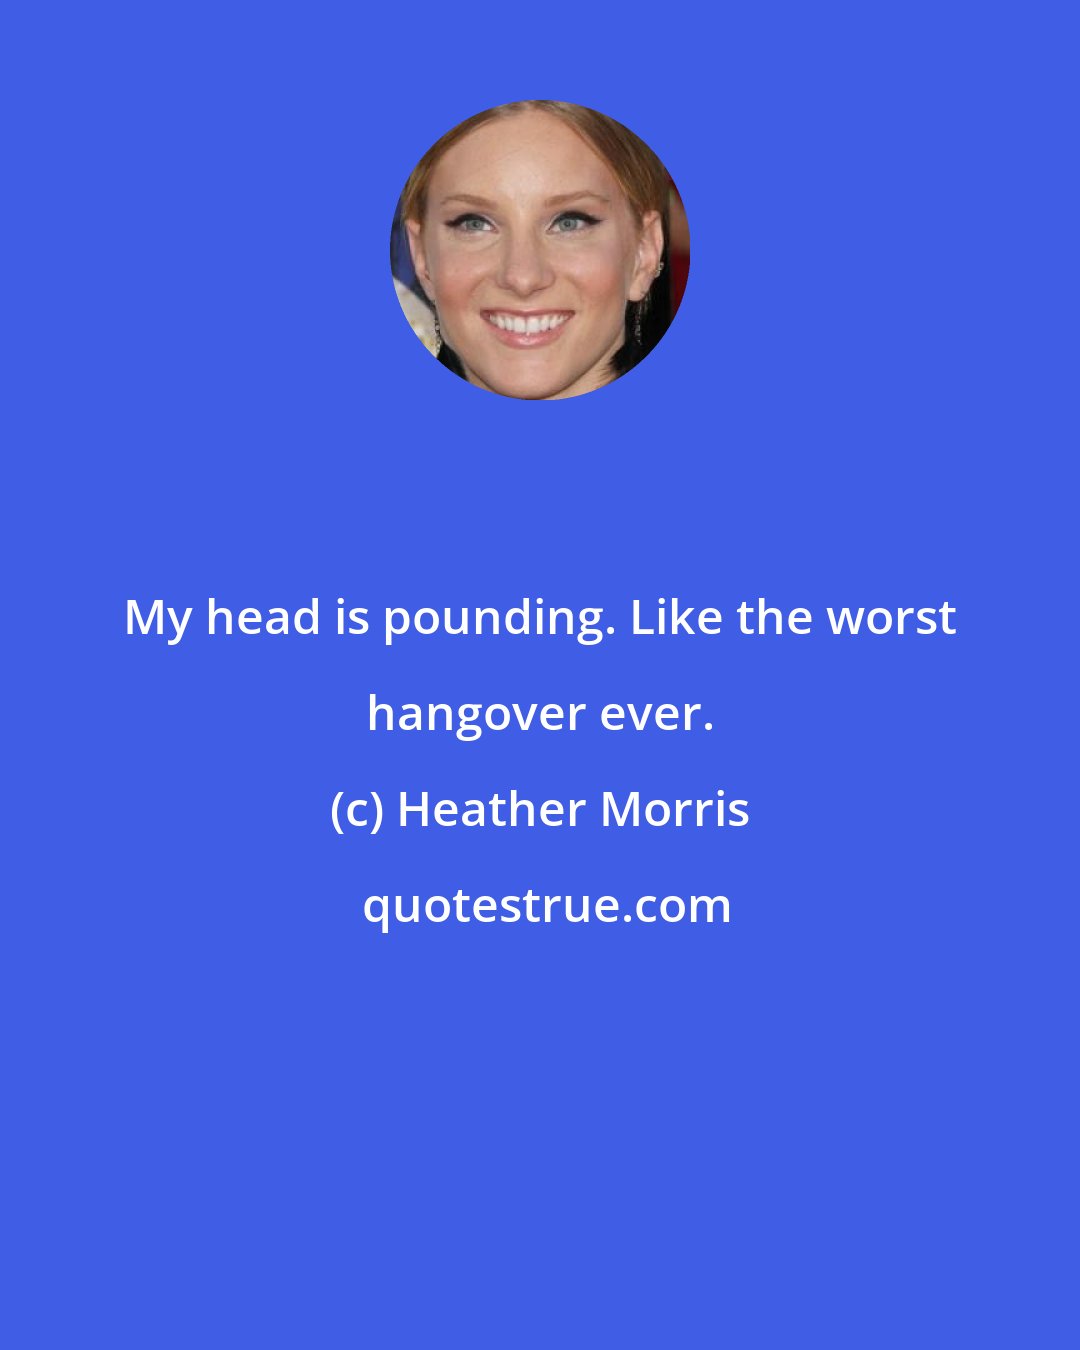 Heather Morris: My head is pounding. Like the worst hangover ever.